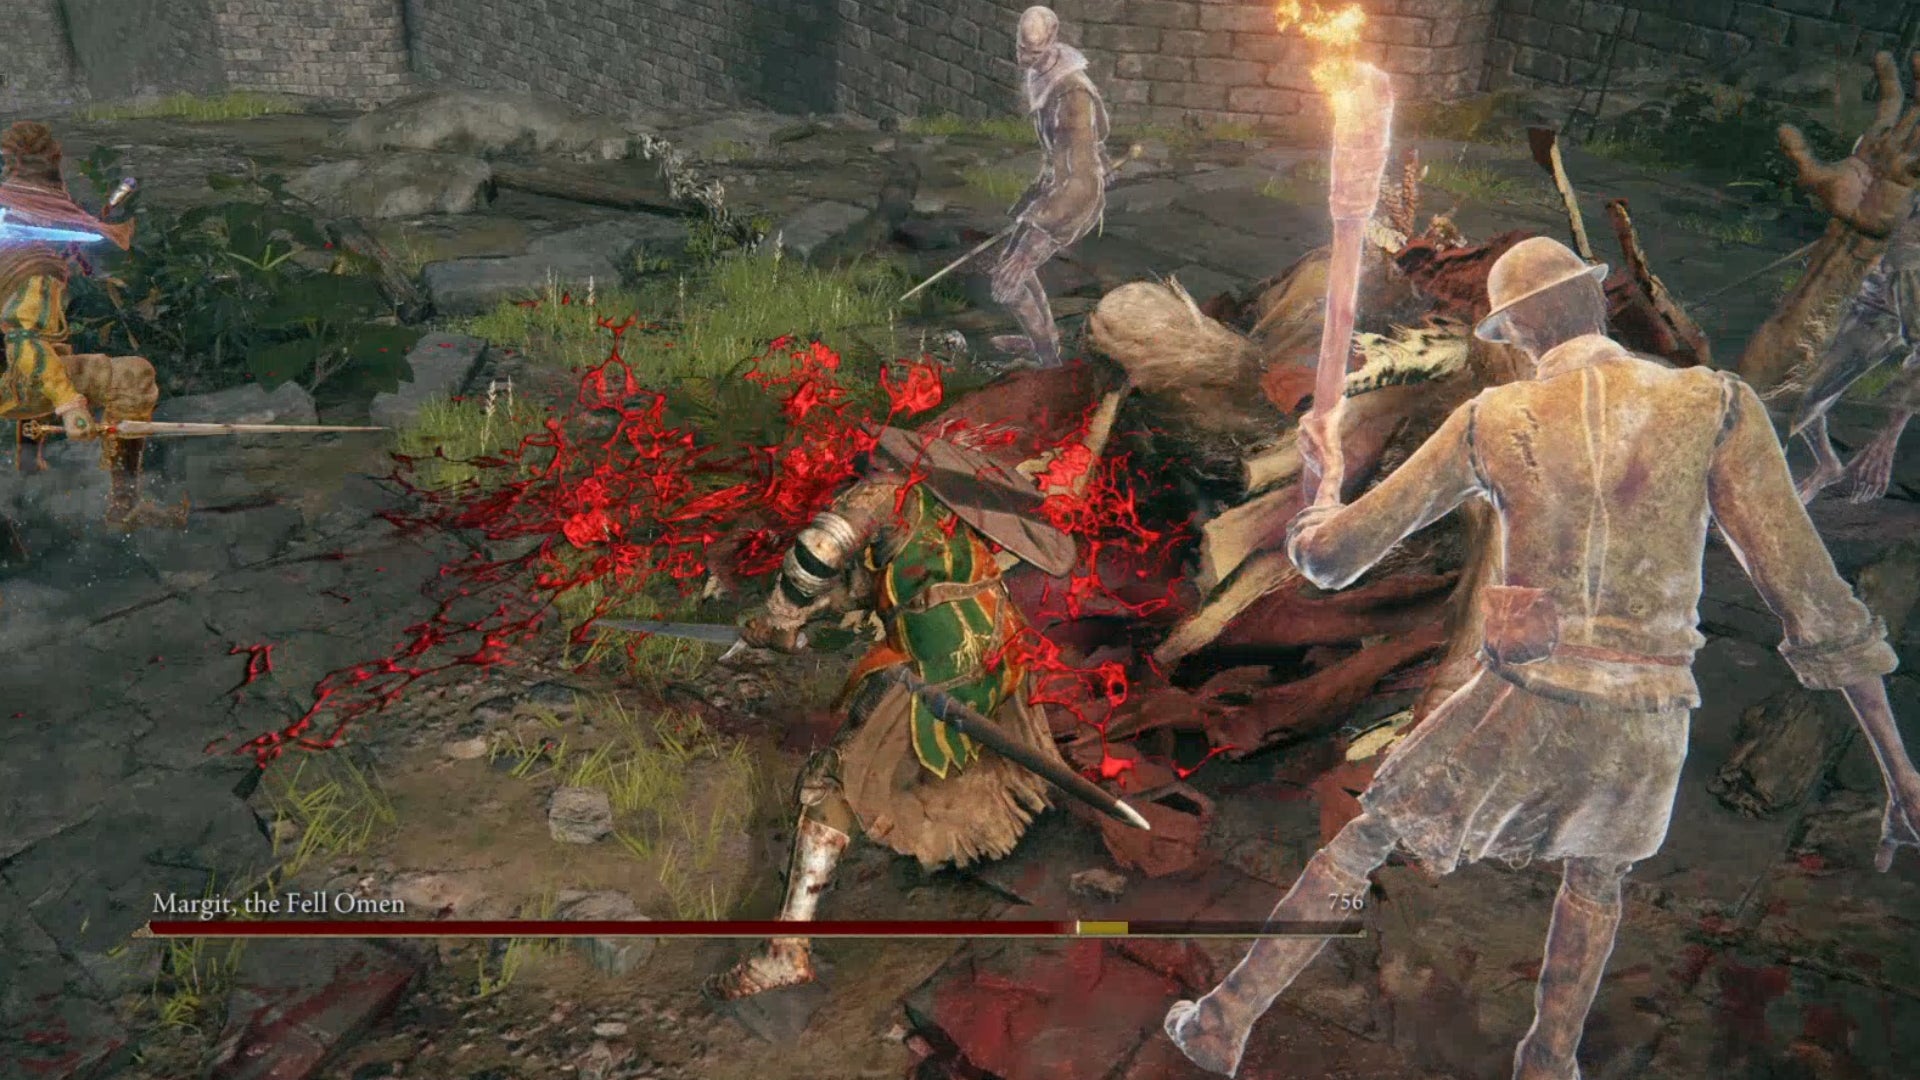 The player in Elden Ring staggers and then crits Margit, causing blood to spray across the ground.